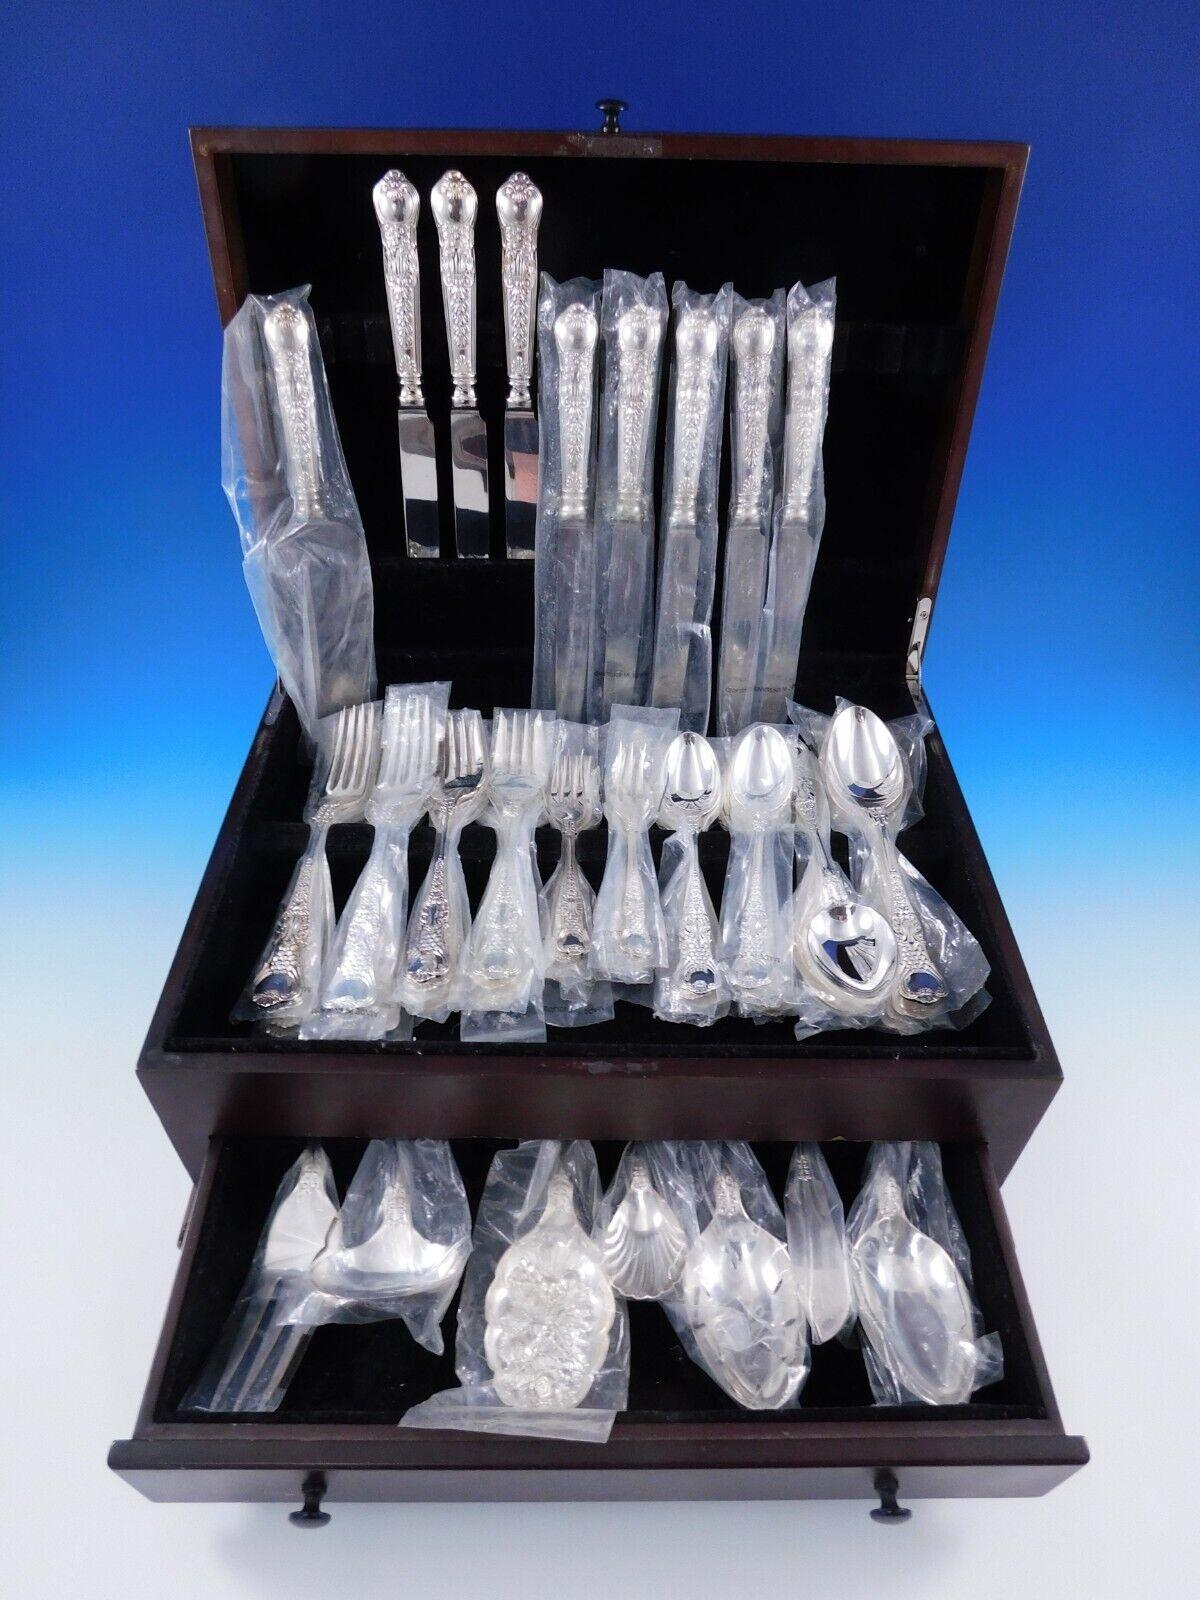 Dinner Size Coburg by Roberts & Belk Sheffield England Silverplated Flatware set, 56 pieces. This set includes:

8 Large Dinner Size Knives, 10